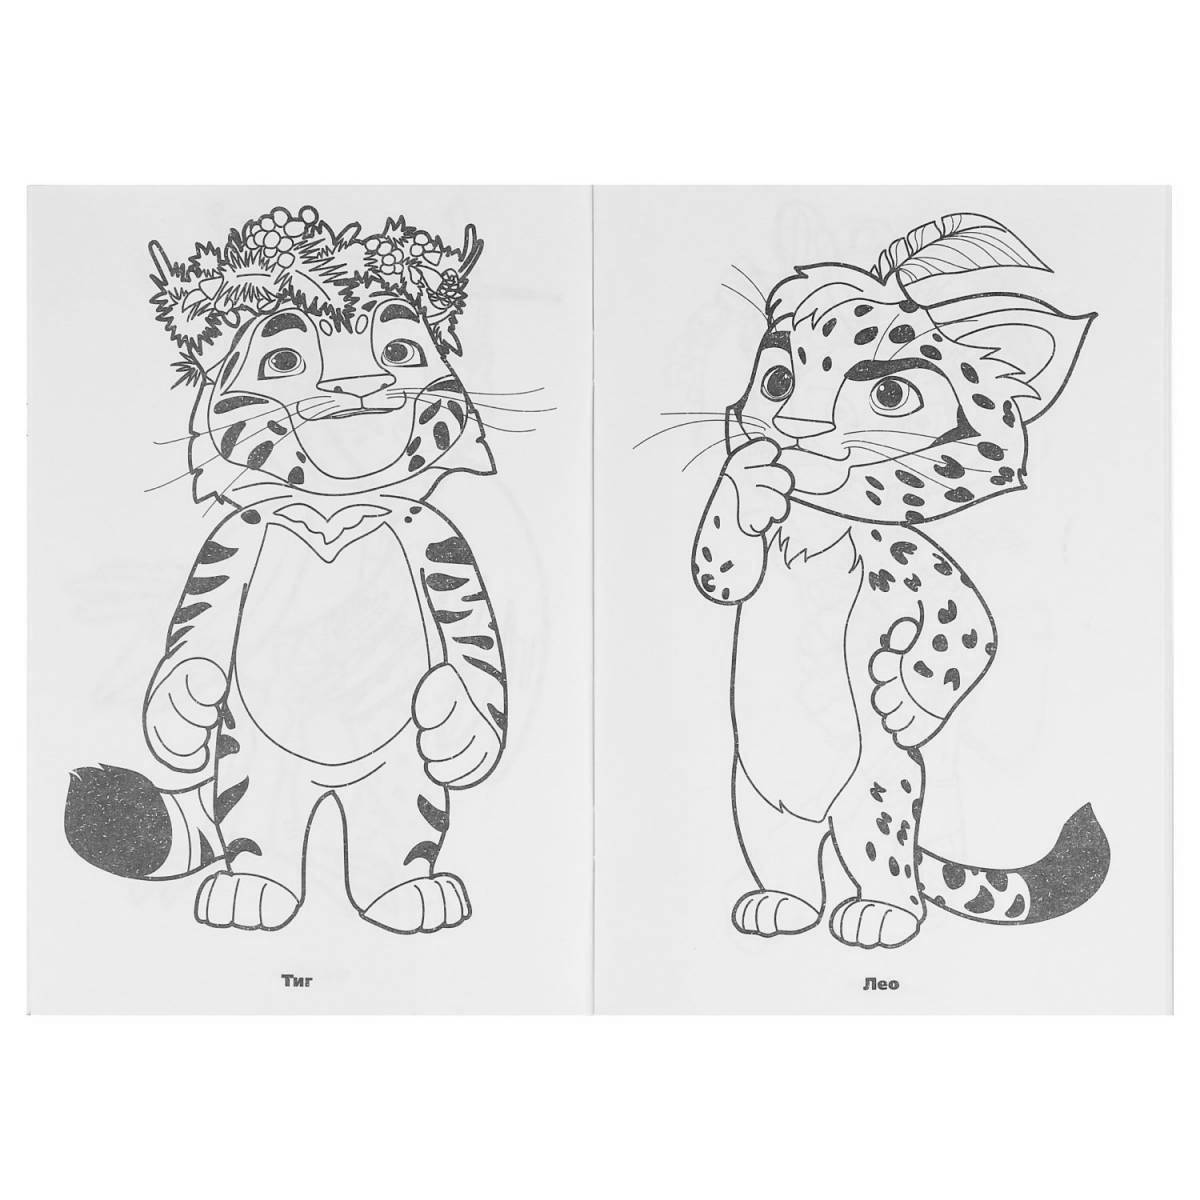 Magnificent tiger and lion coloring pages for kids